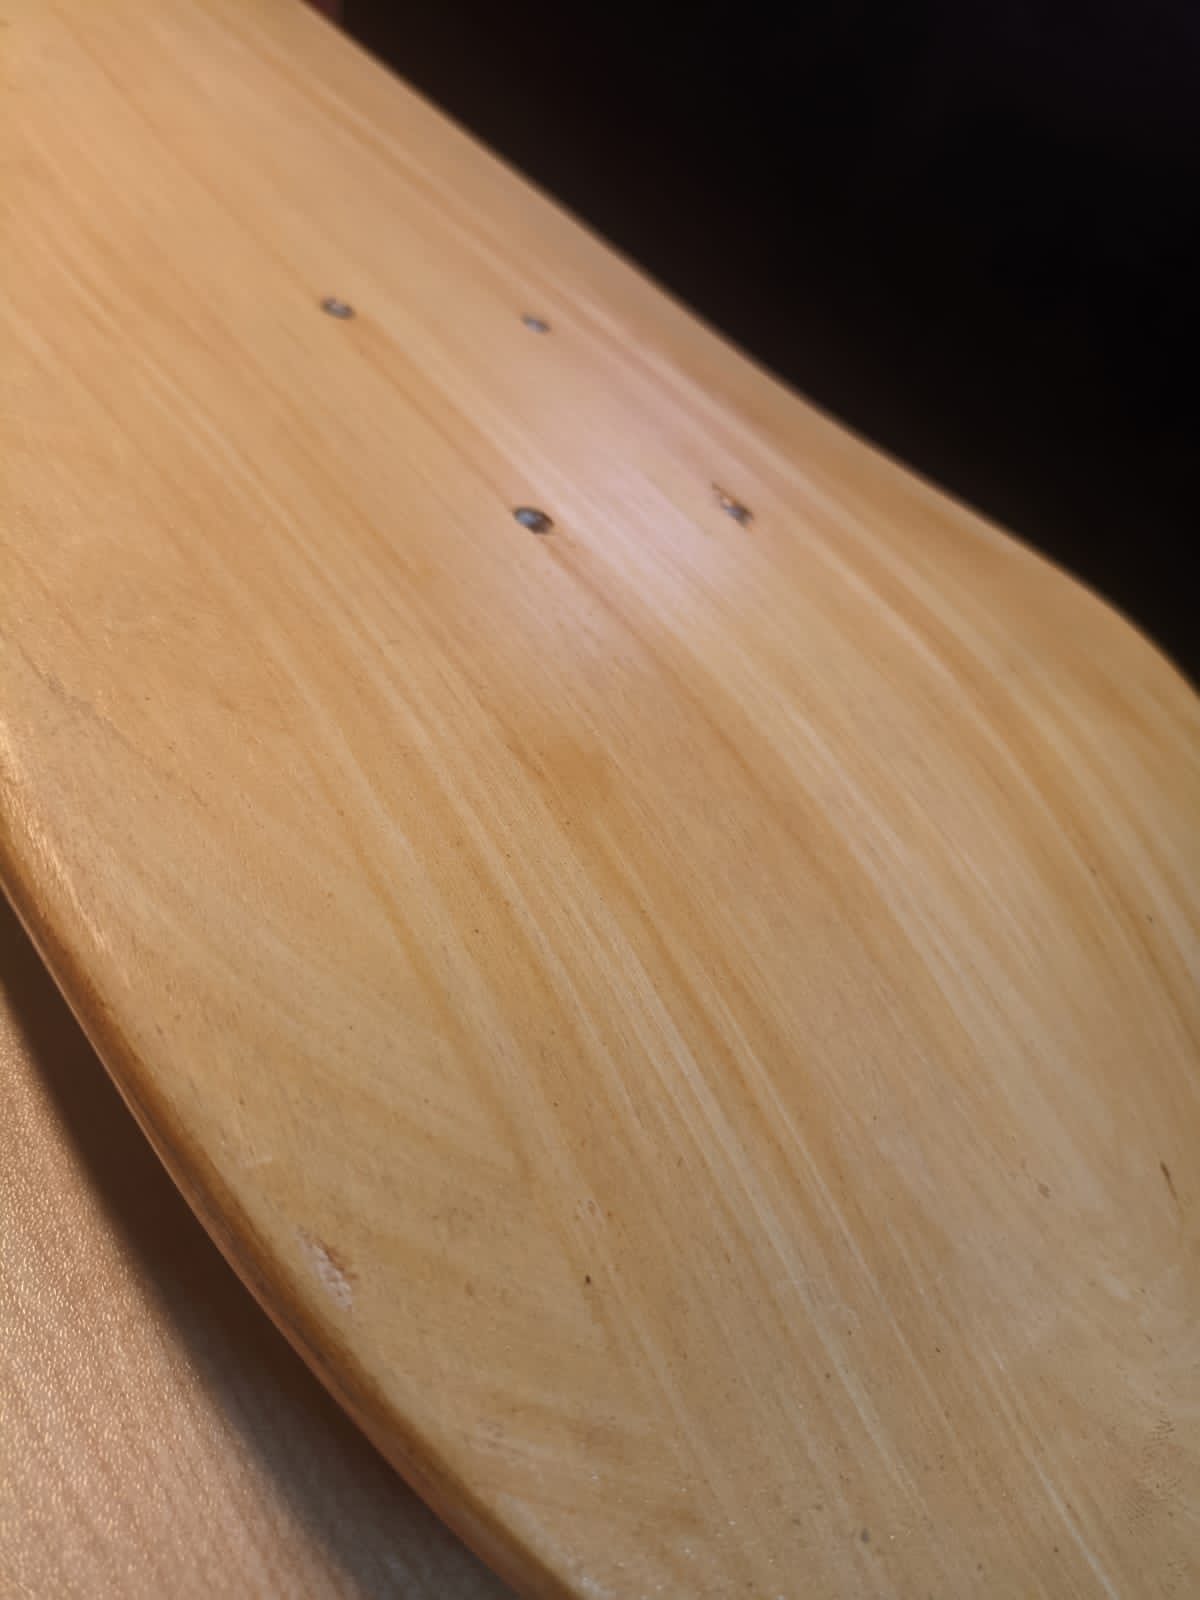 Most blank skateboard decks come between the size of 7.5 and 9 inches.